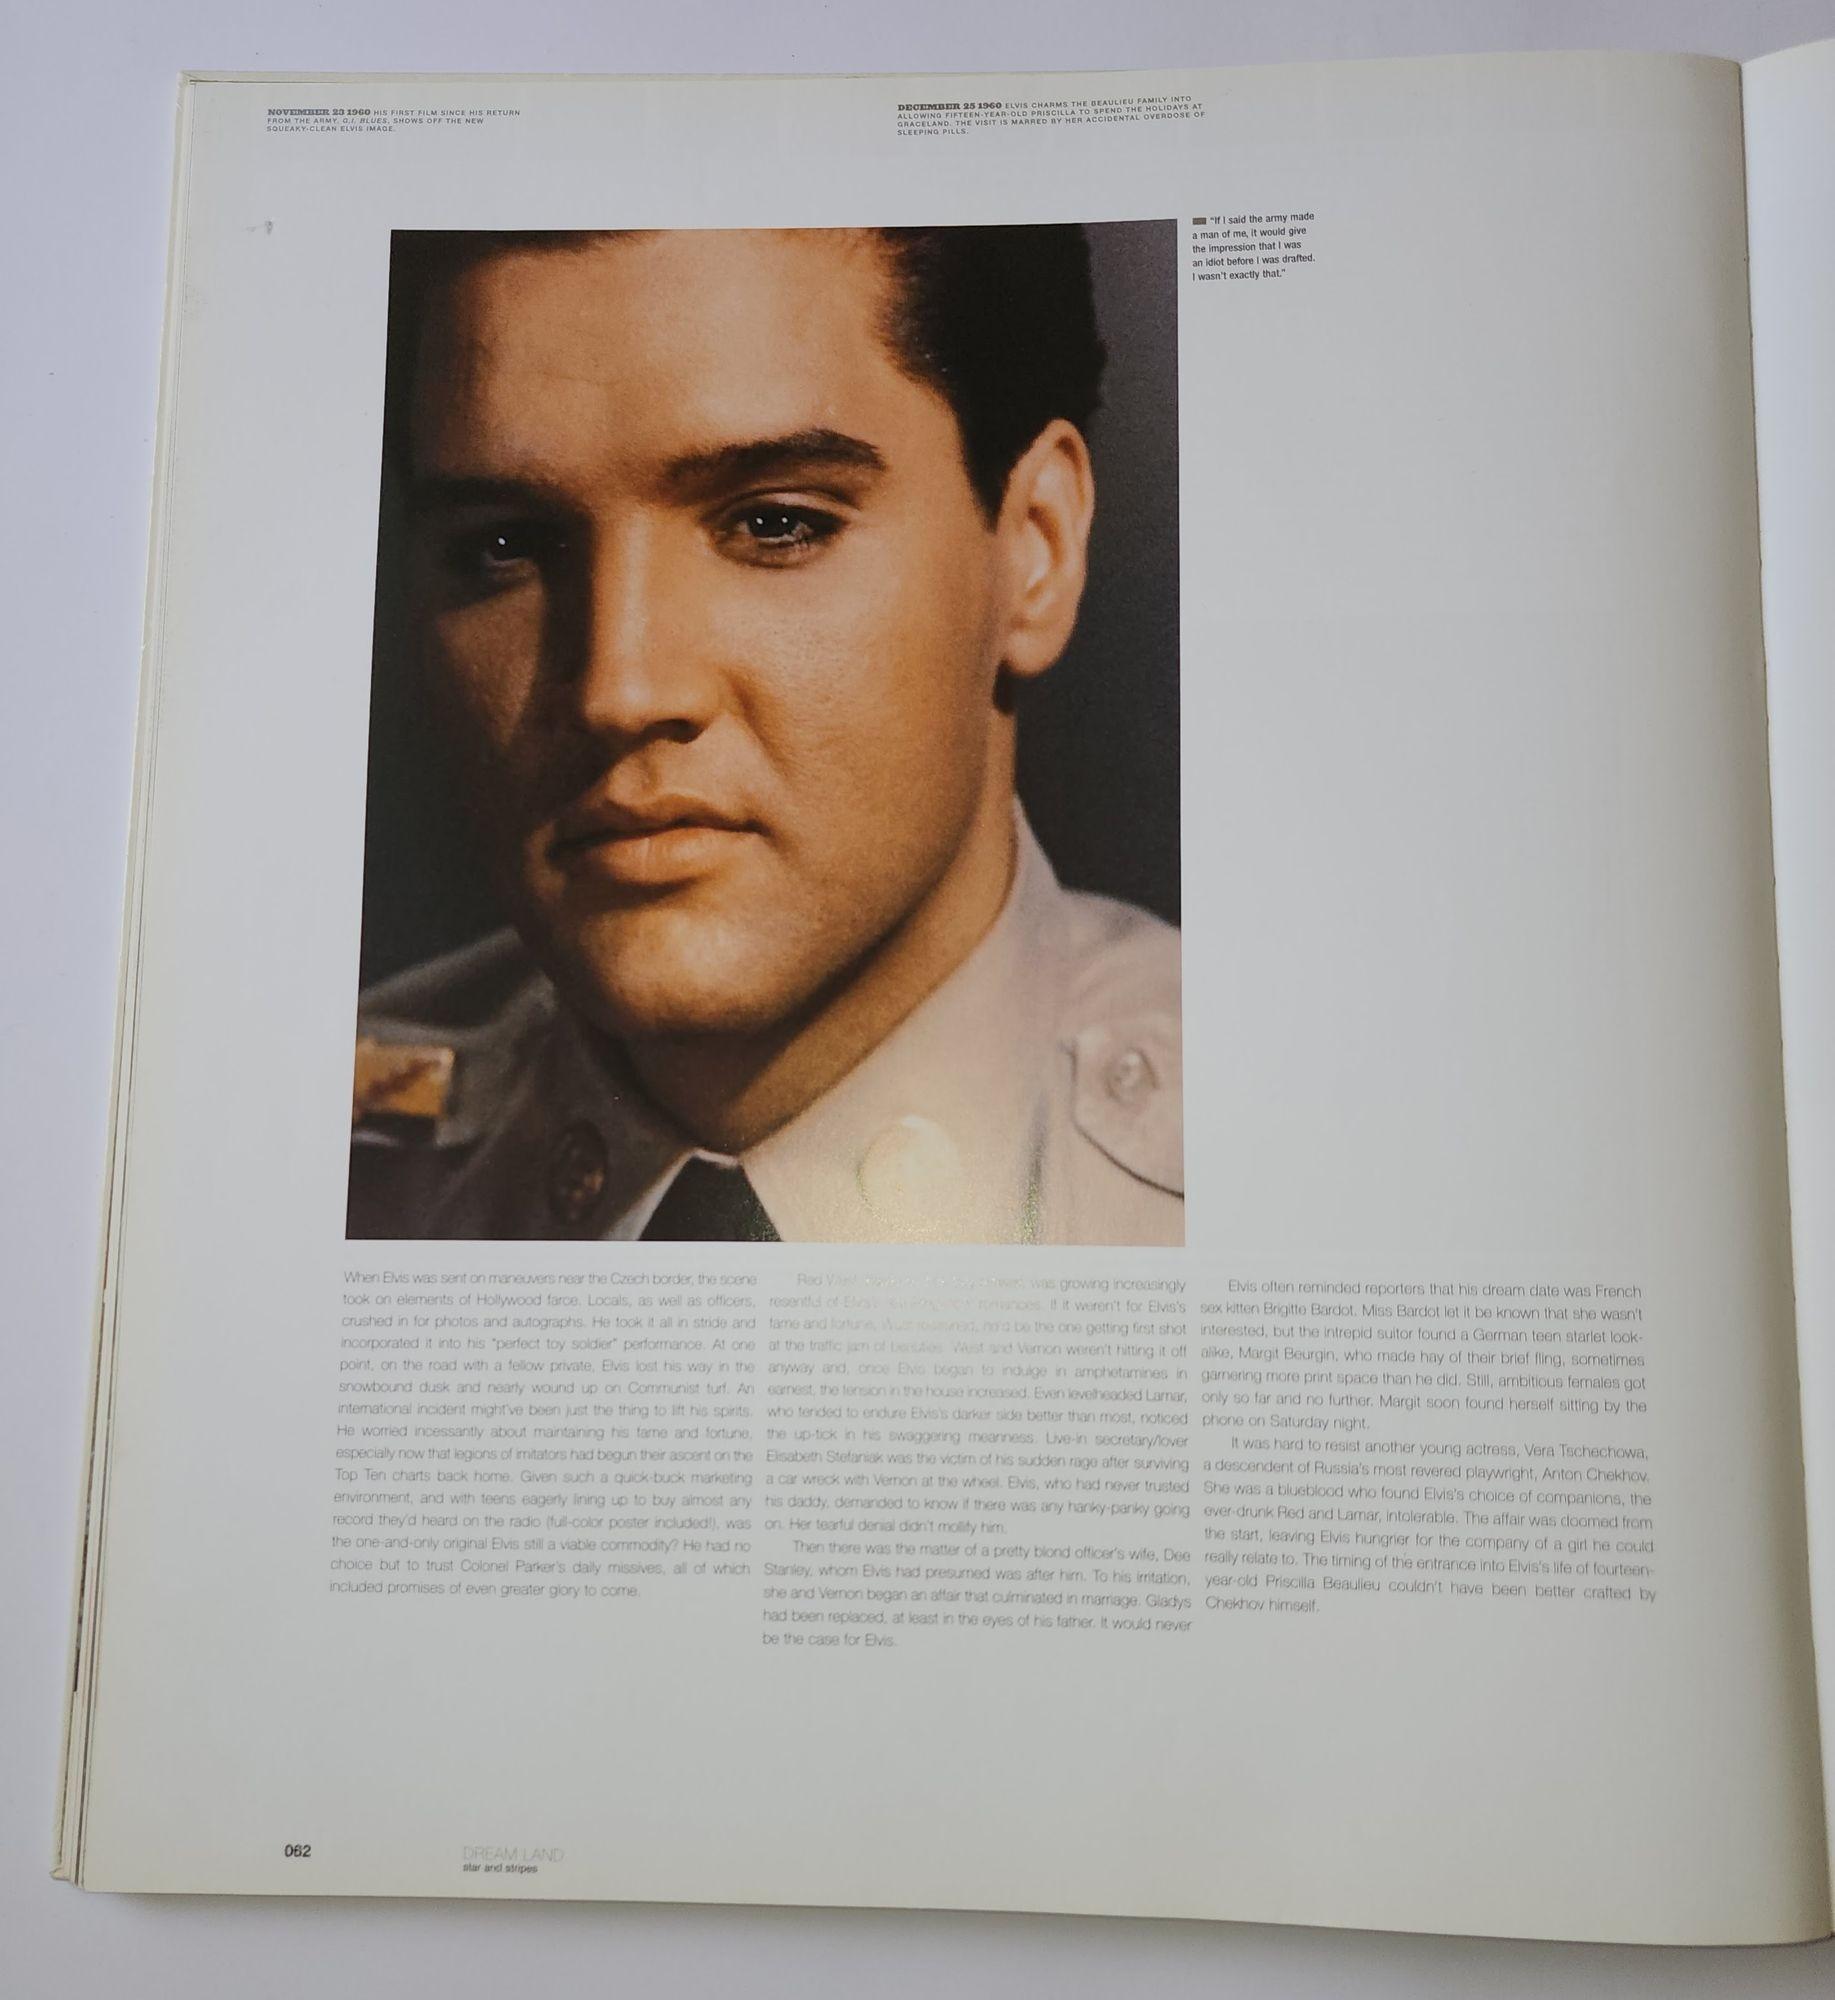 The King by Jim Piazza Elvis Presley - Large size coffee table book For Sale 4